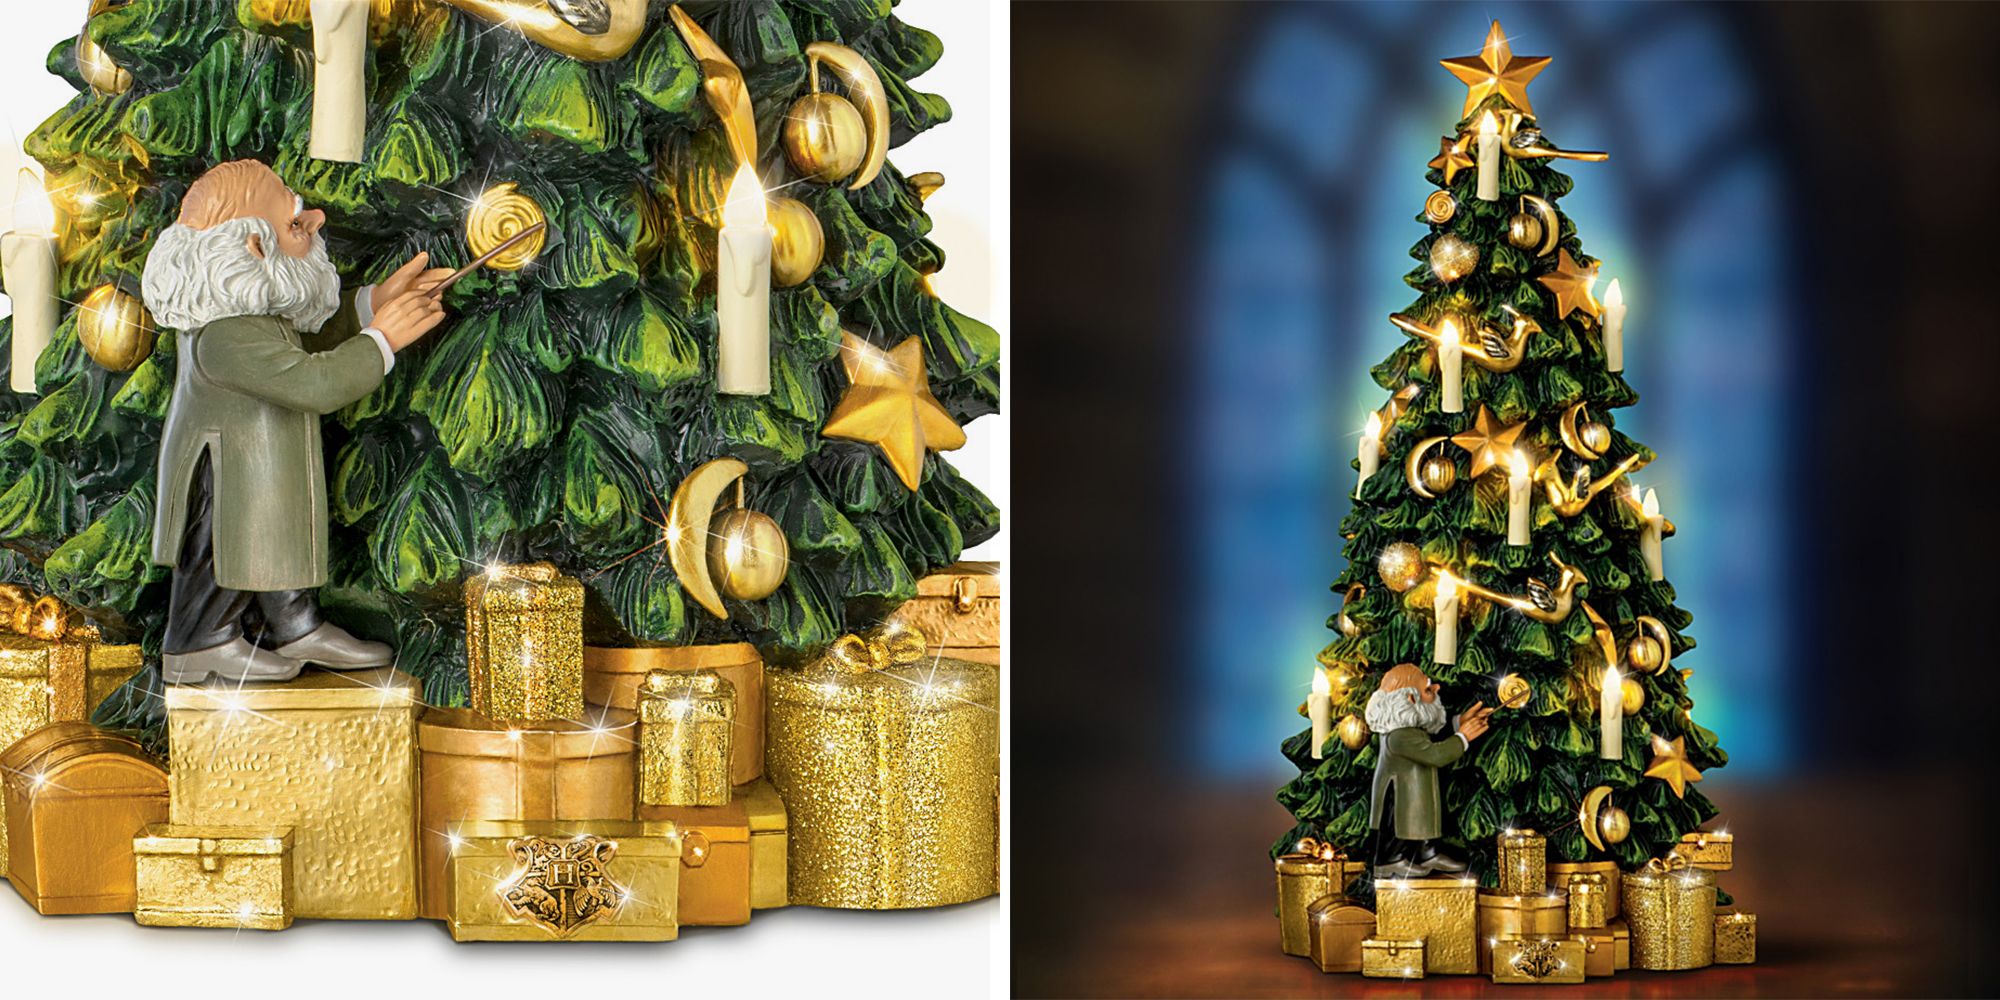 This 'Harry Potter' Tabletop Tree Is Decorated in Flameless